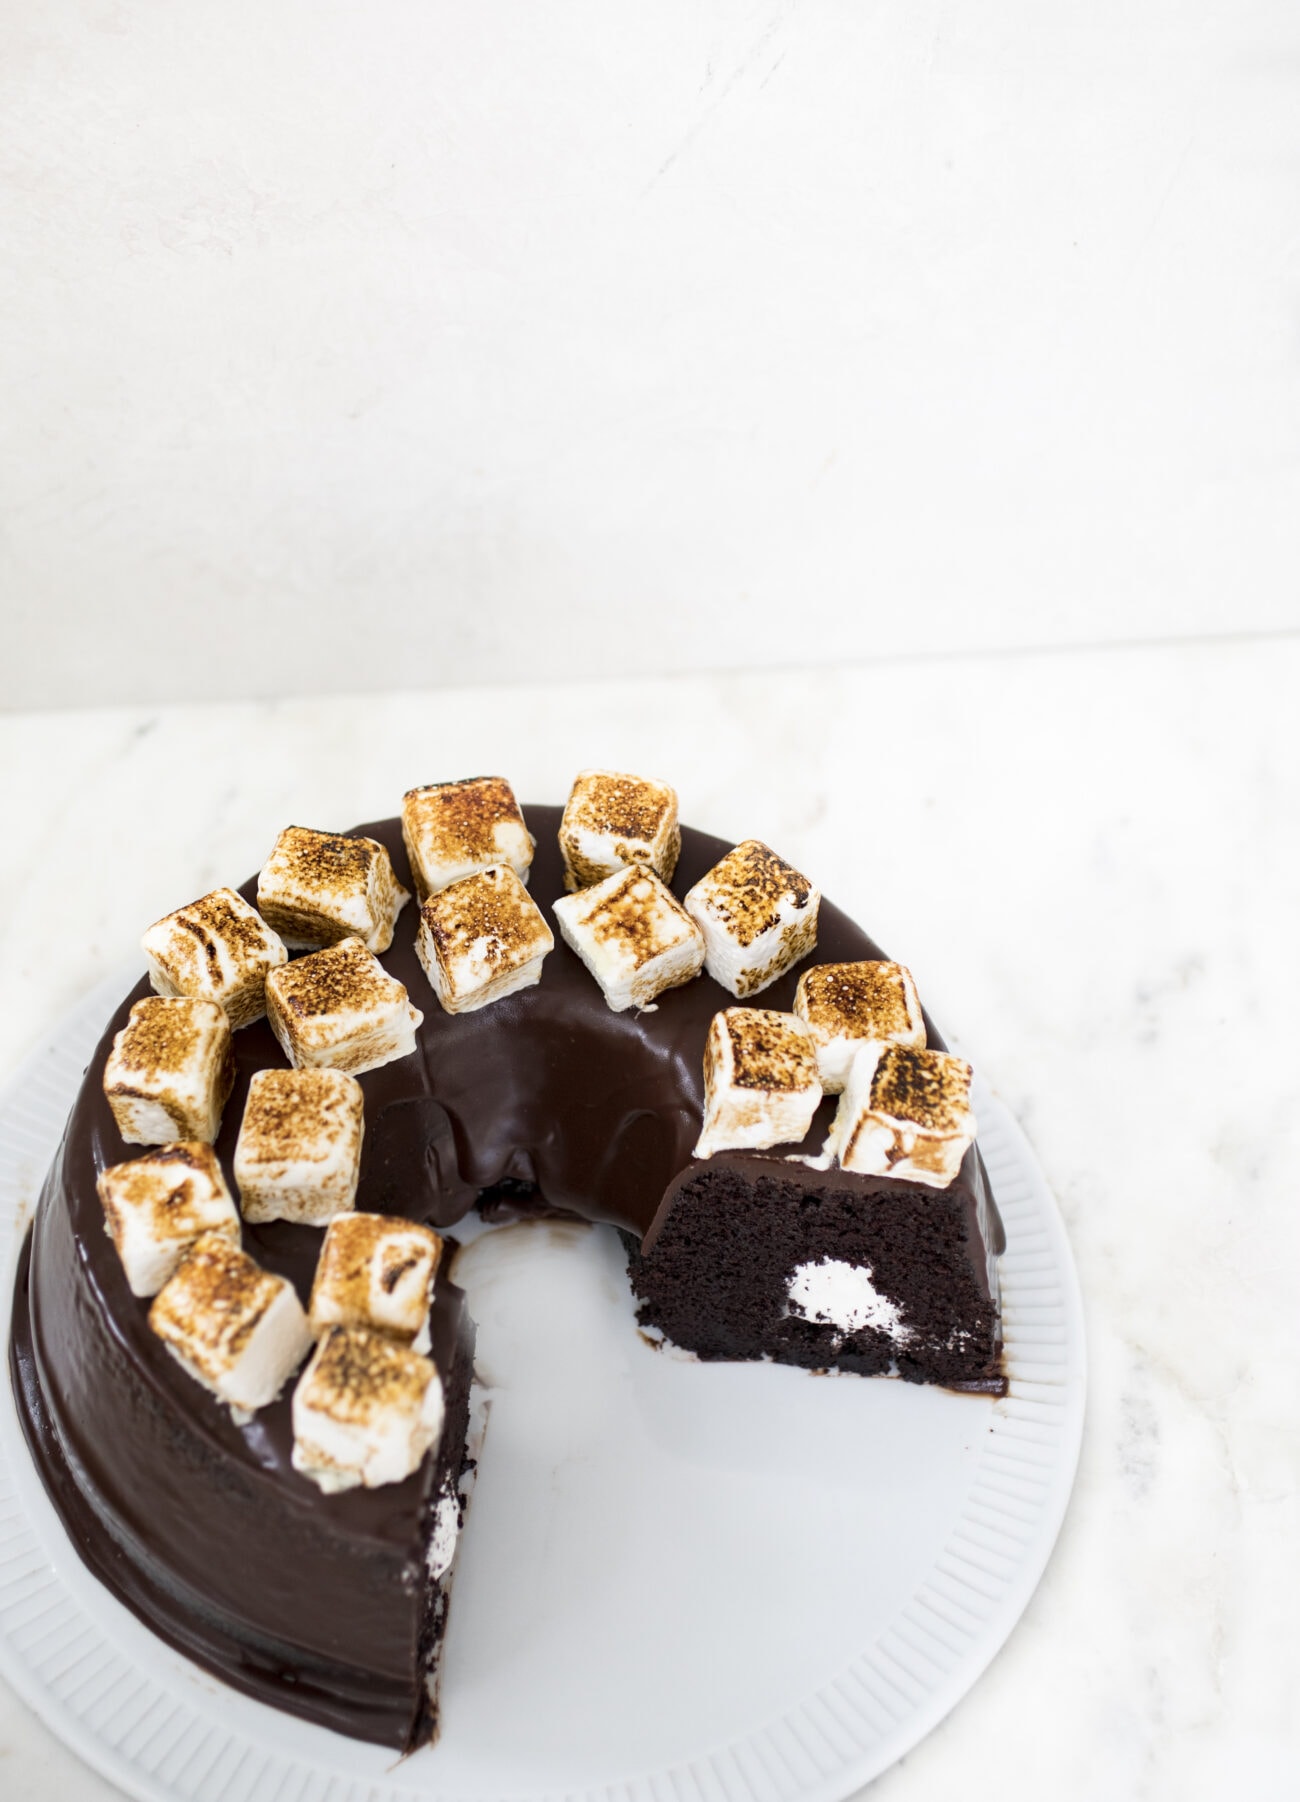 Chocolate cake with marshmallows on top